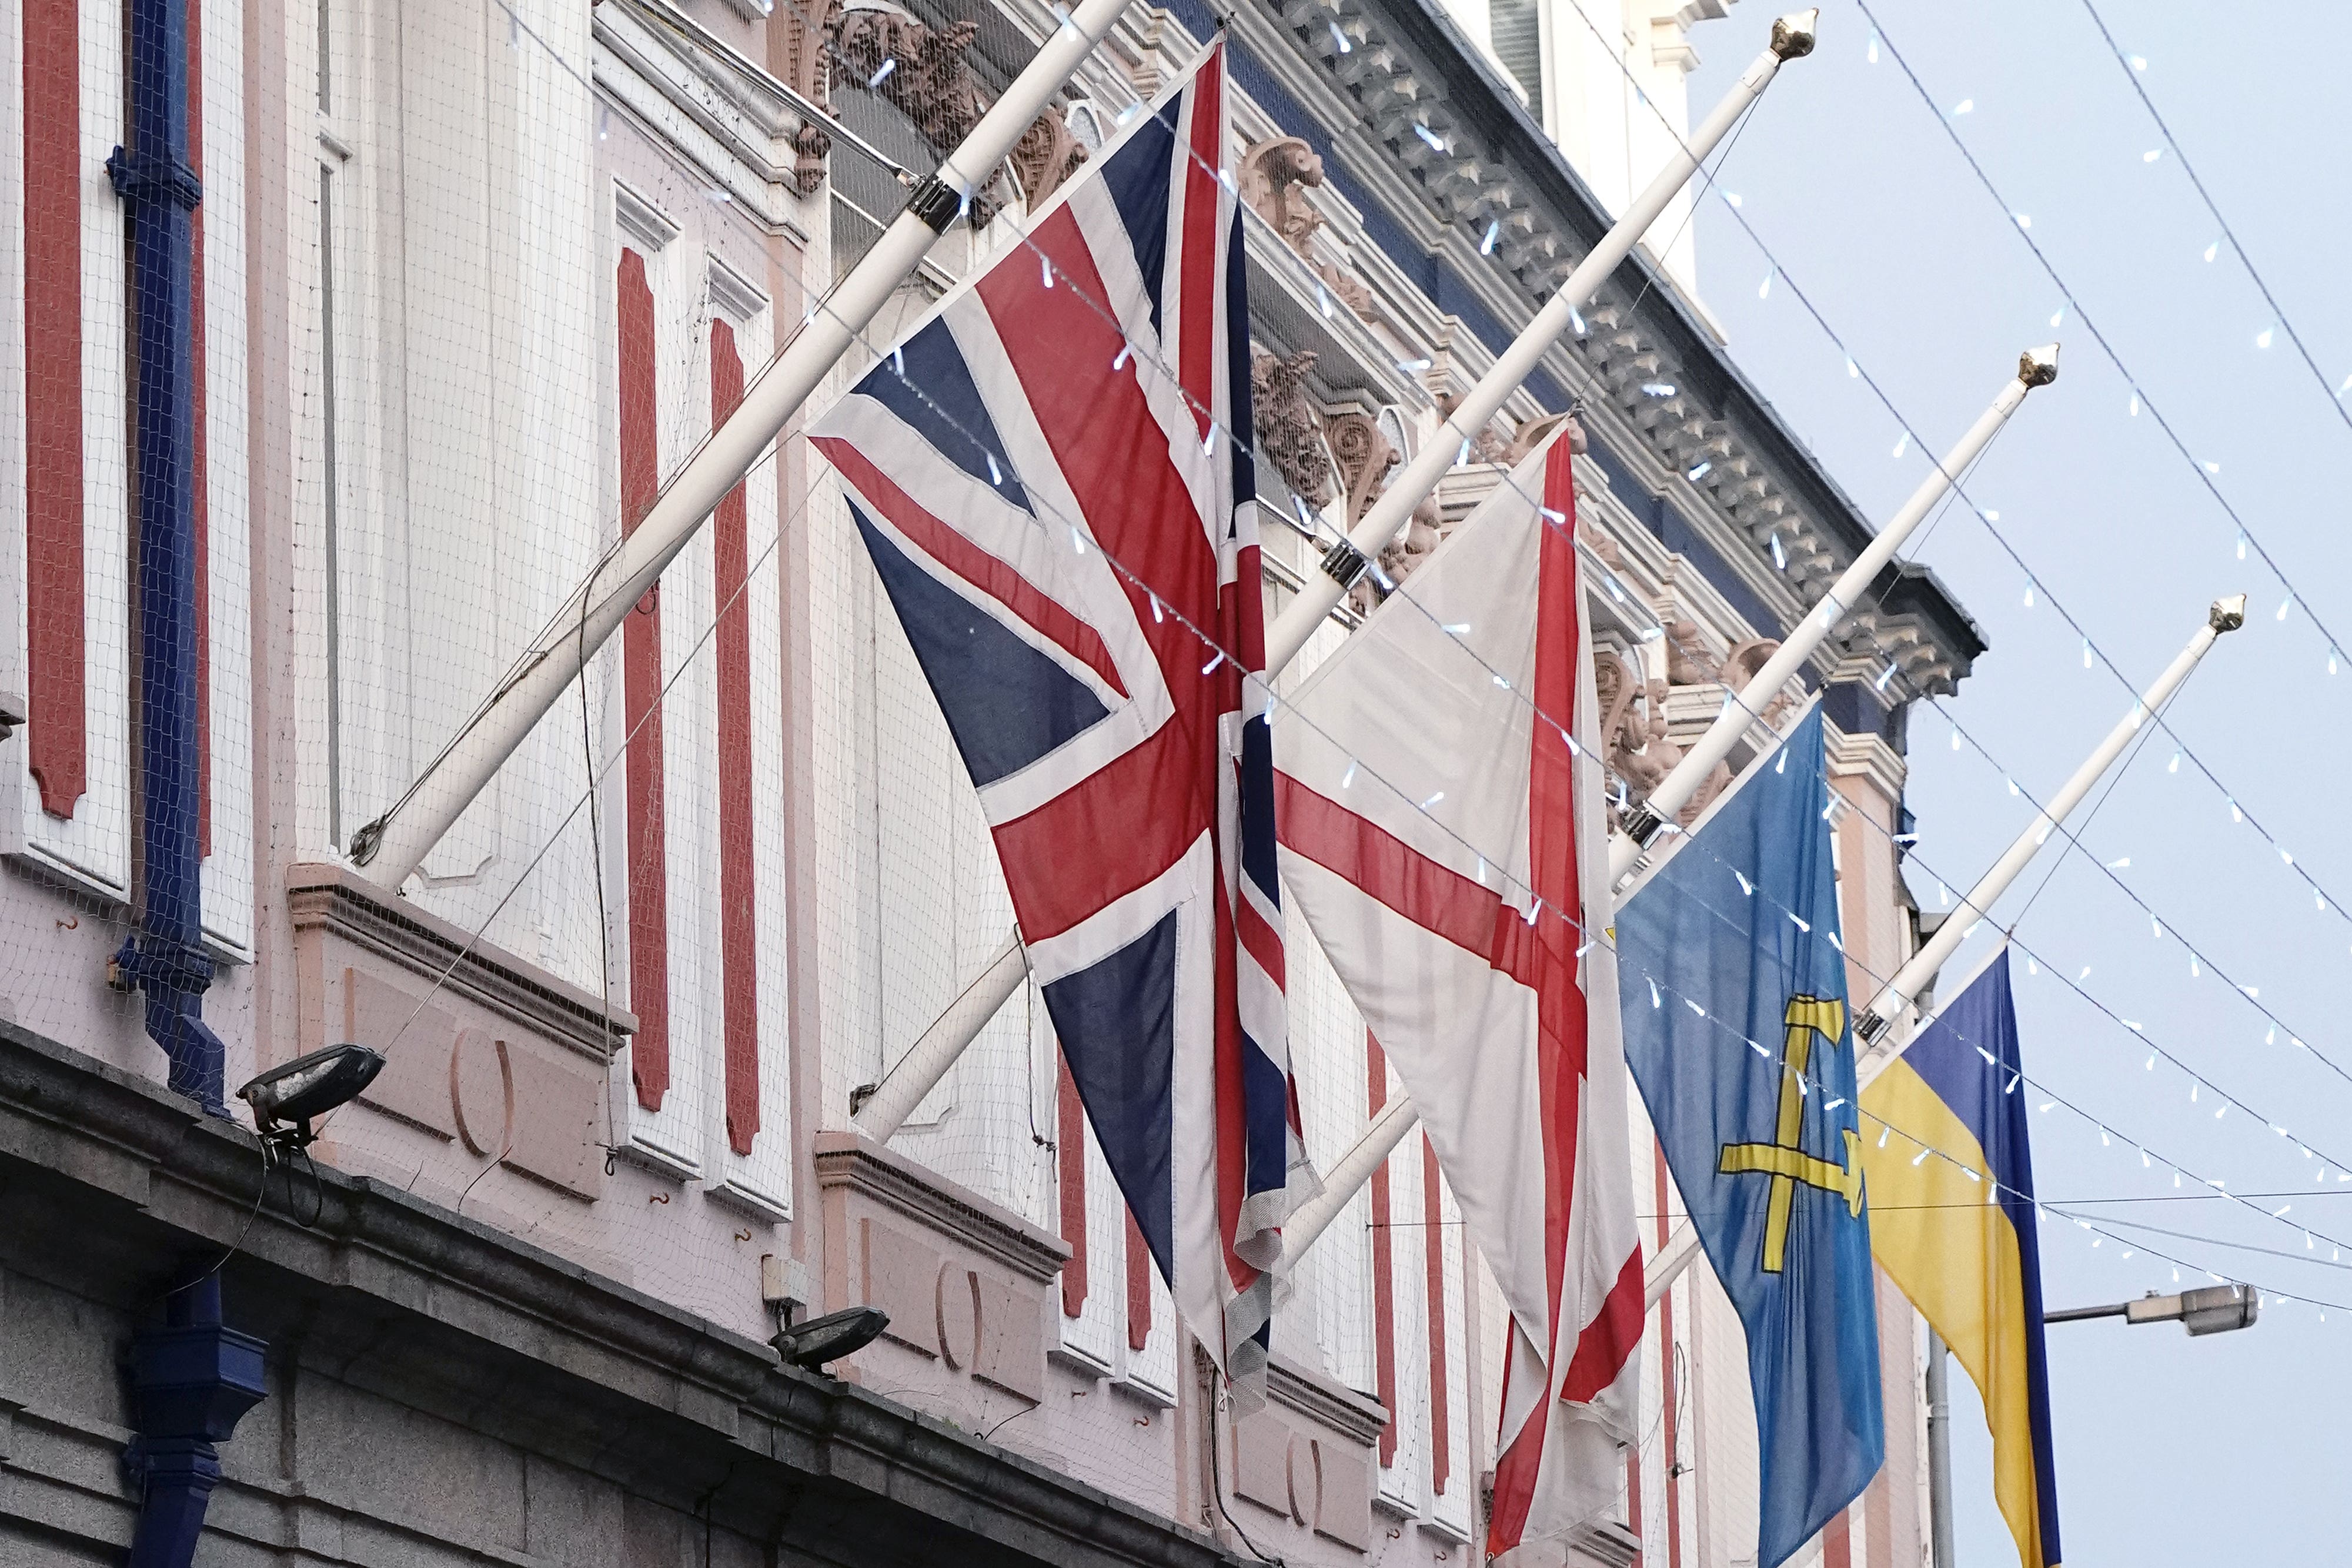 The Union flag, the flag of Jersey, the flag of St Helier and the Ukrainian Flag fly at half-mast over St Helier Town Hall, following an explosion and fire at a block of flats in St Helier, Jersey. Police have said that five people are now confirmed to have died following the blast (Aaron Chown/PA)